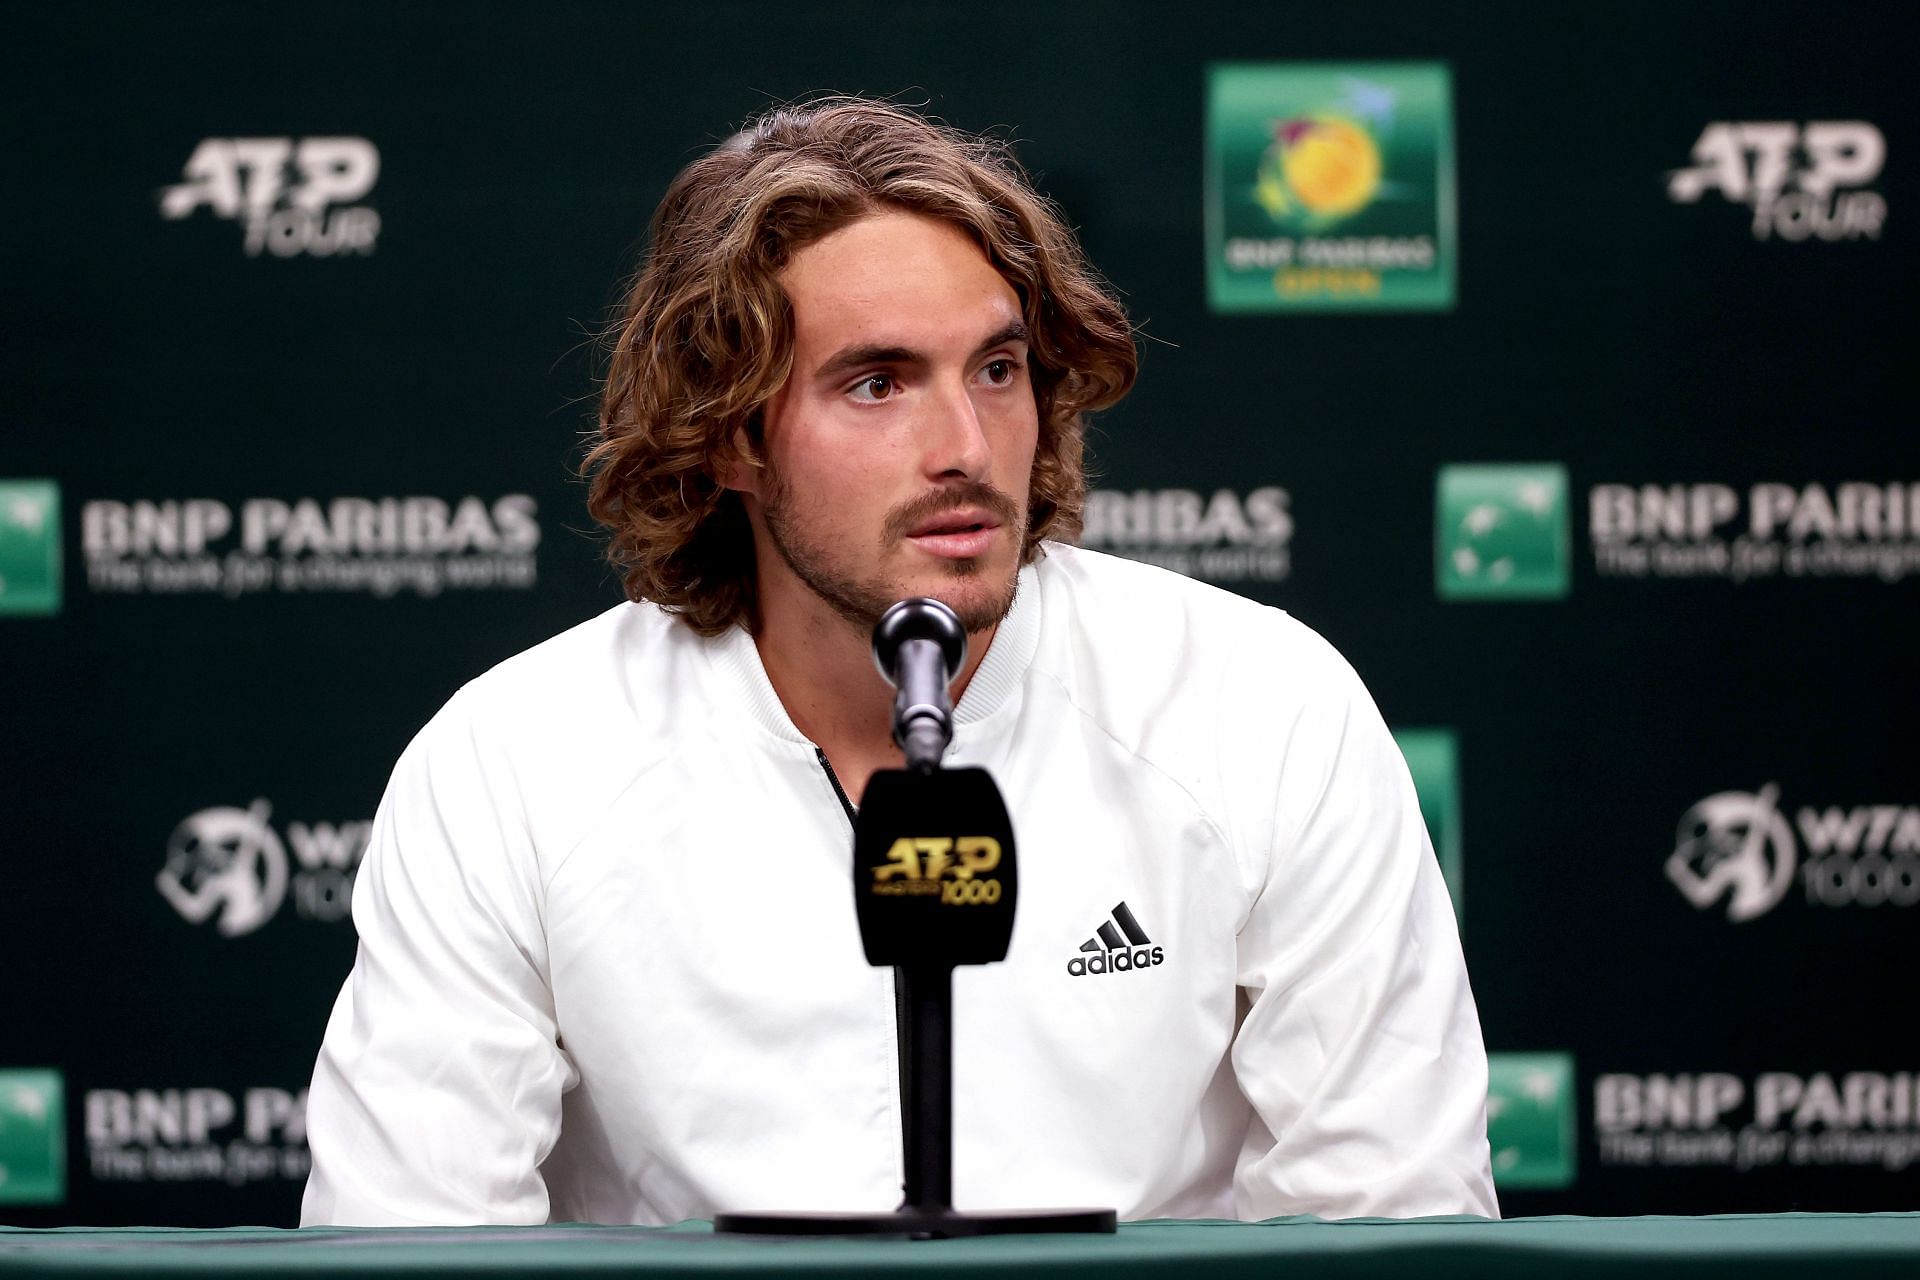 Stefanos Tsitsipas speaks during a press conference at the 2022 Indian Wells Masters